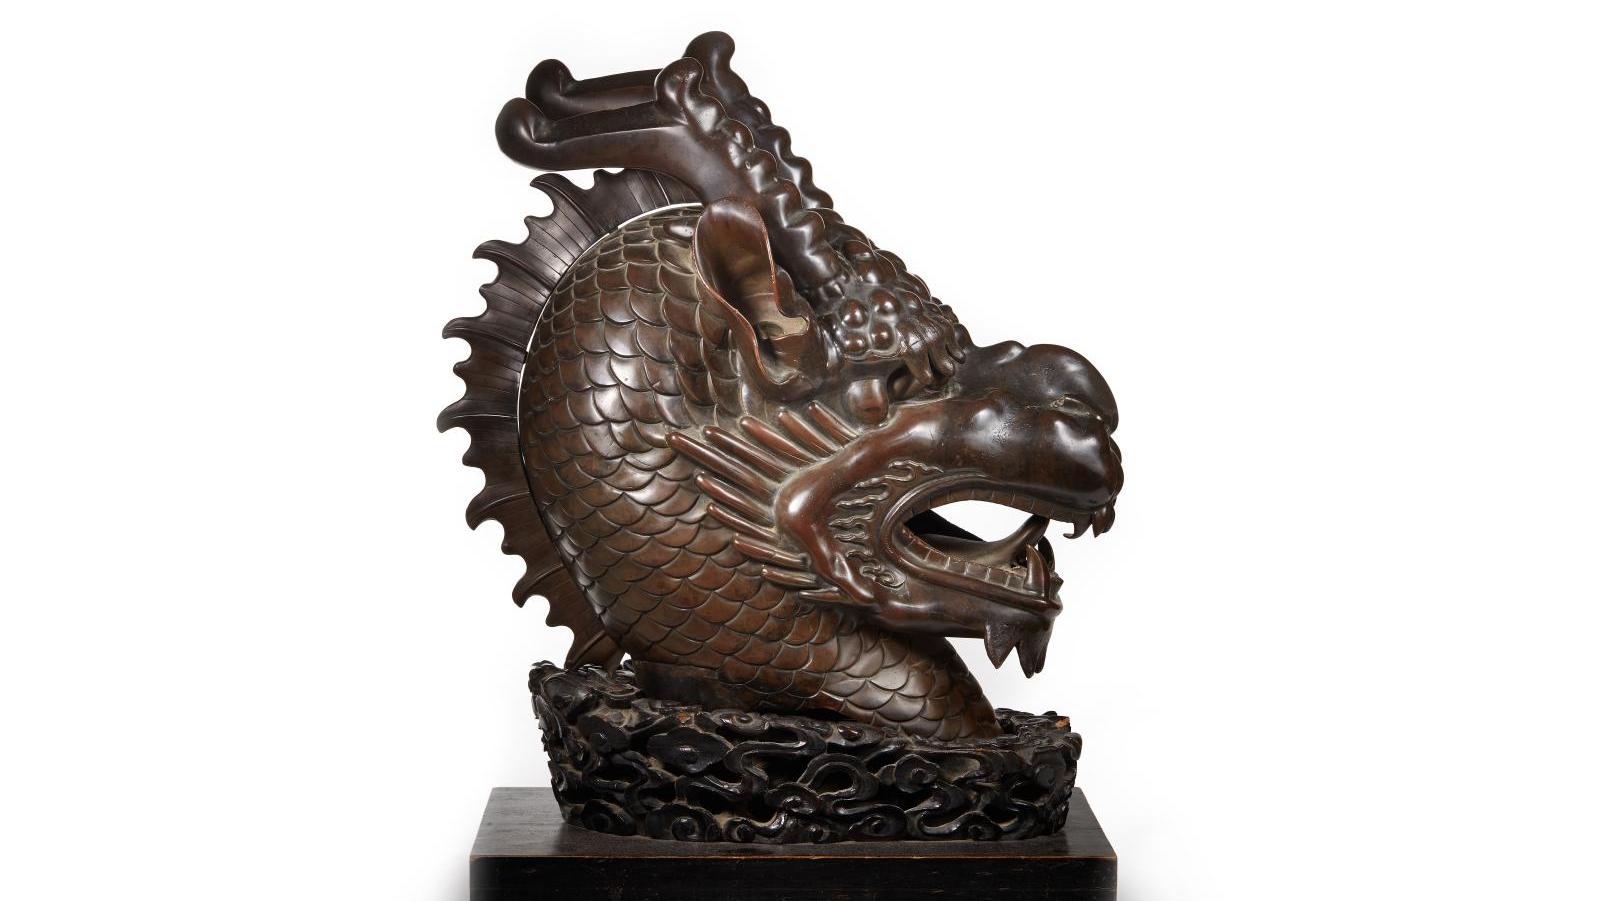 €3MIndochina, 19th century, dragon's head in bronze with brown patina, 40 x 45 cm.... €10.5 M for Asia at Drouot 